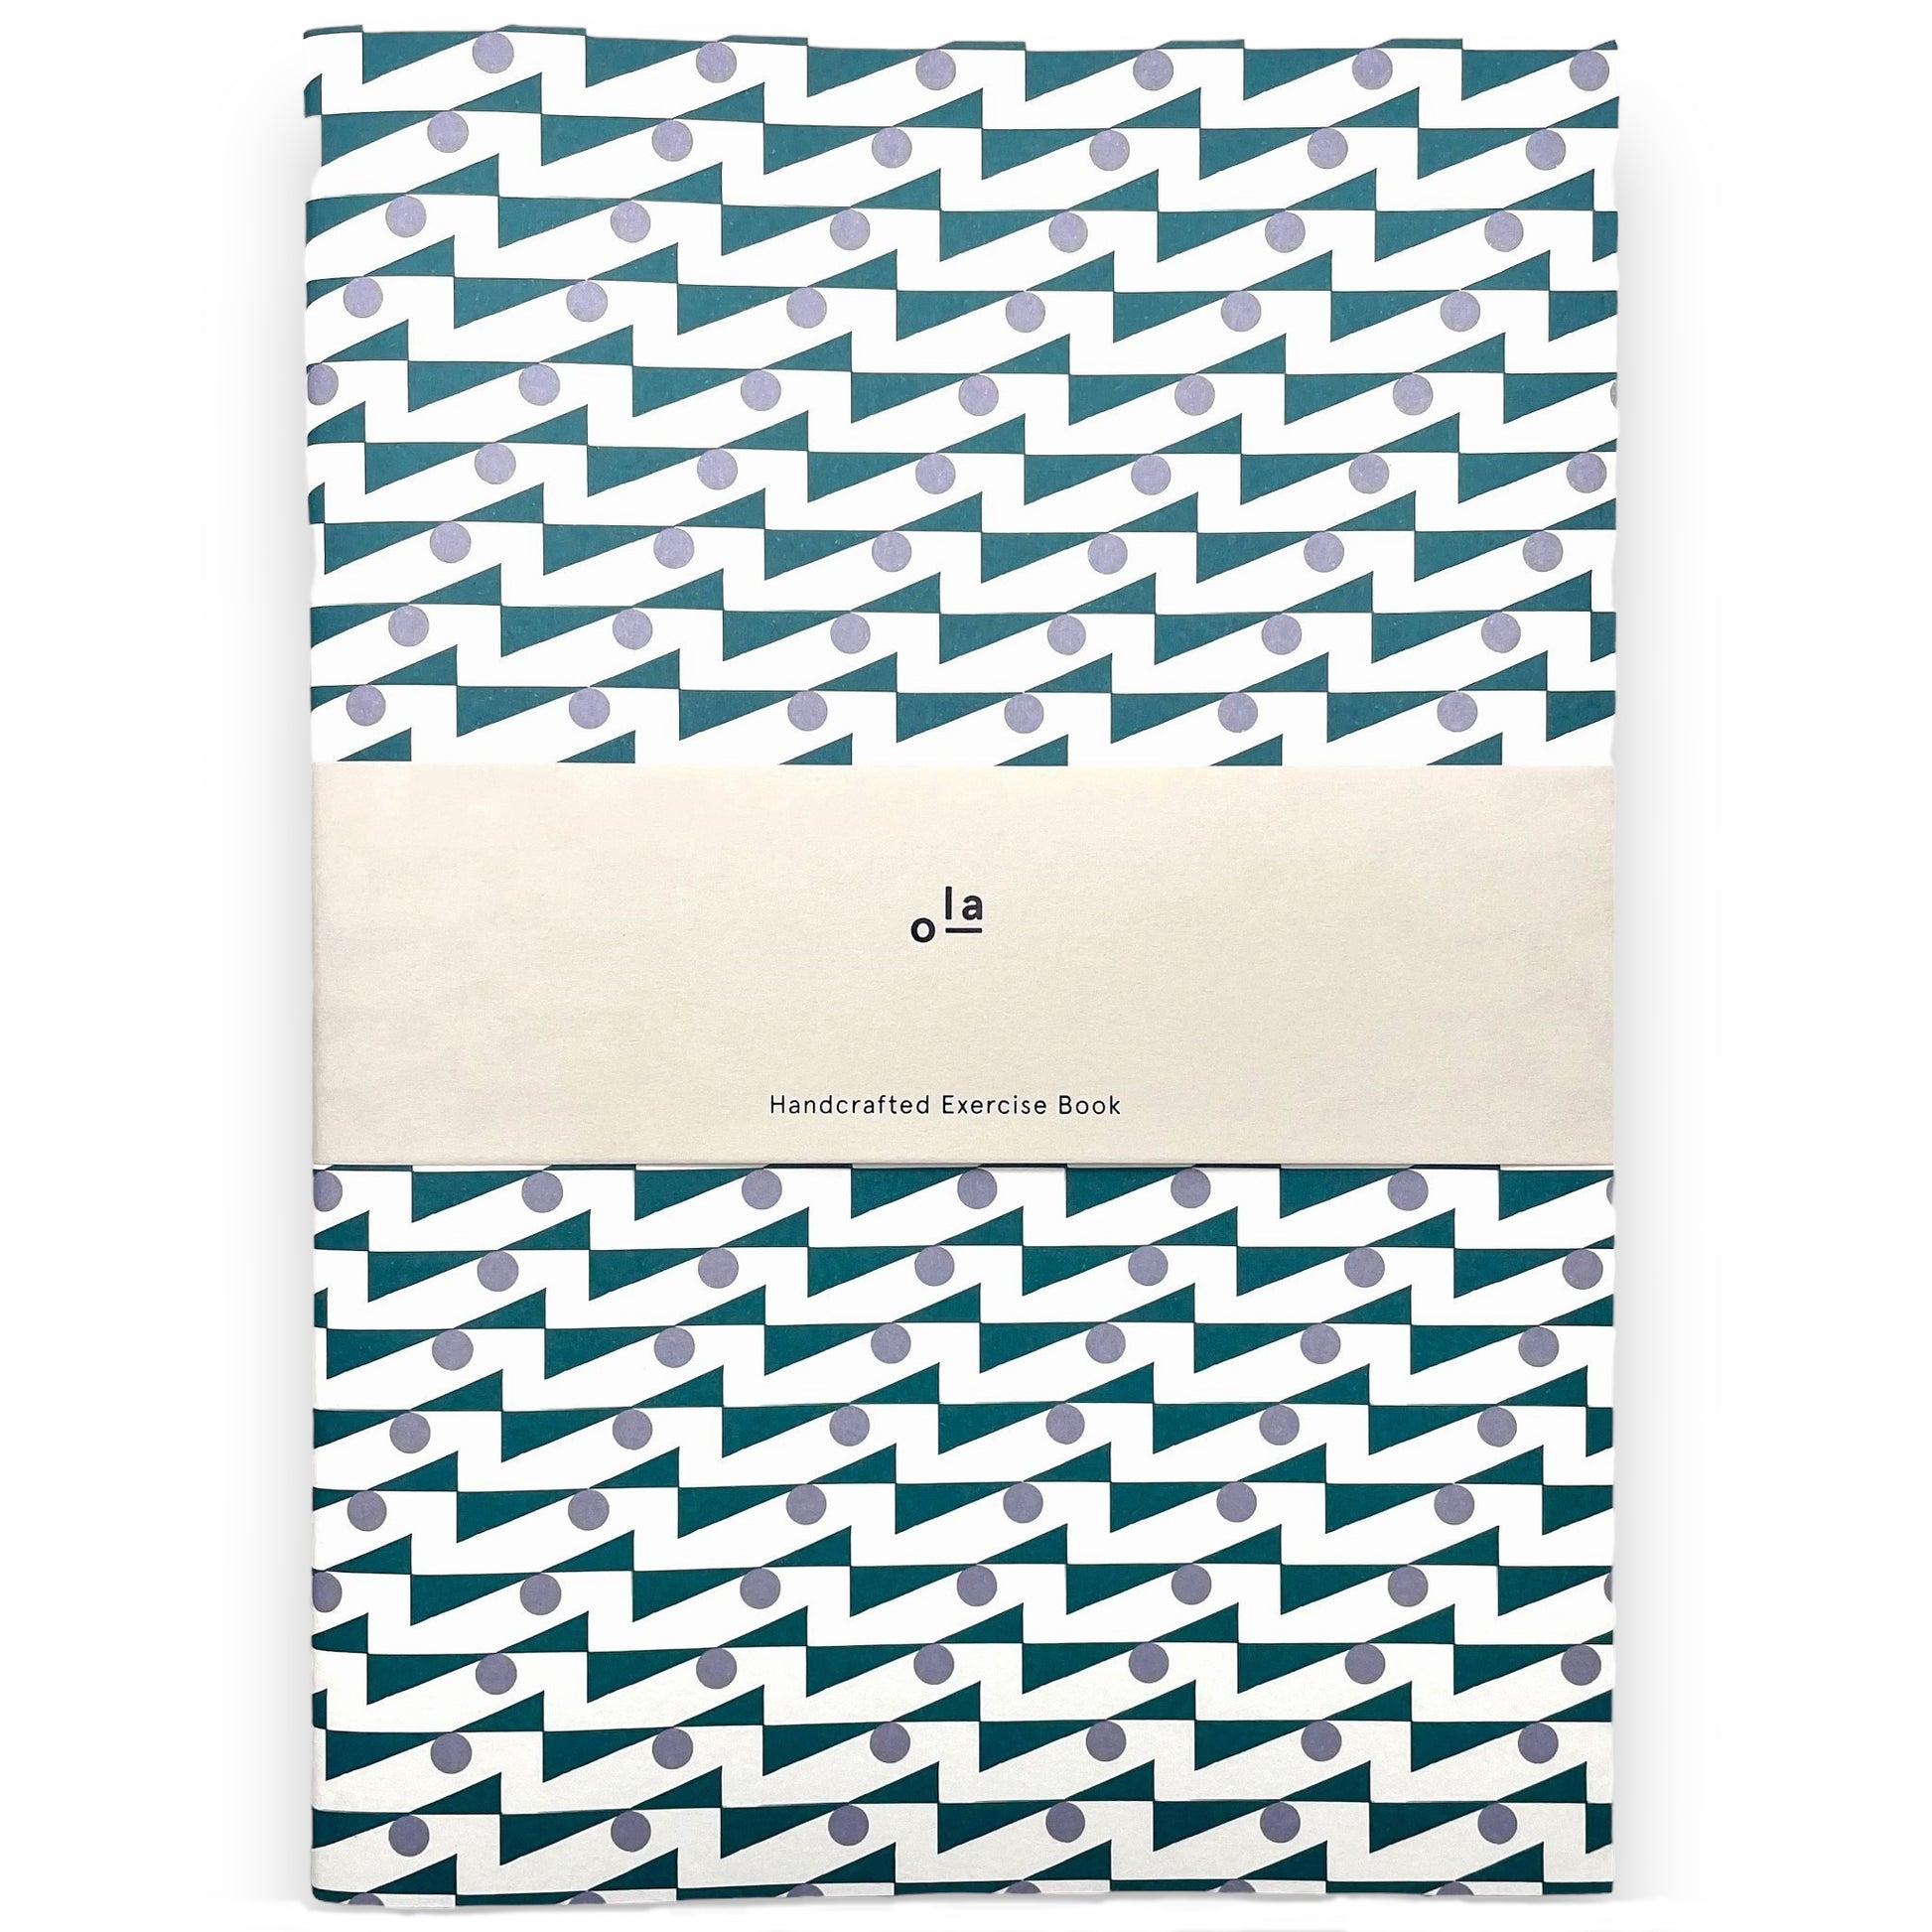 slimline exercise book with plain pages by Ola Studio, cover is a geometric repeat design in teal and lilac on a white background. Pictured with branded presentation band